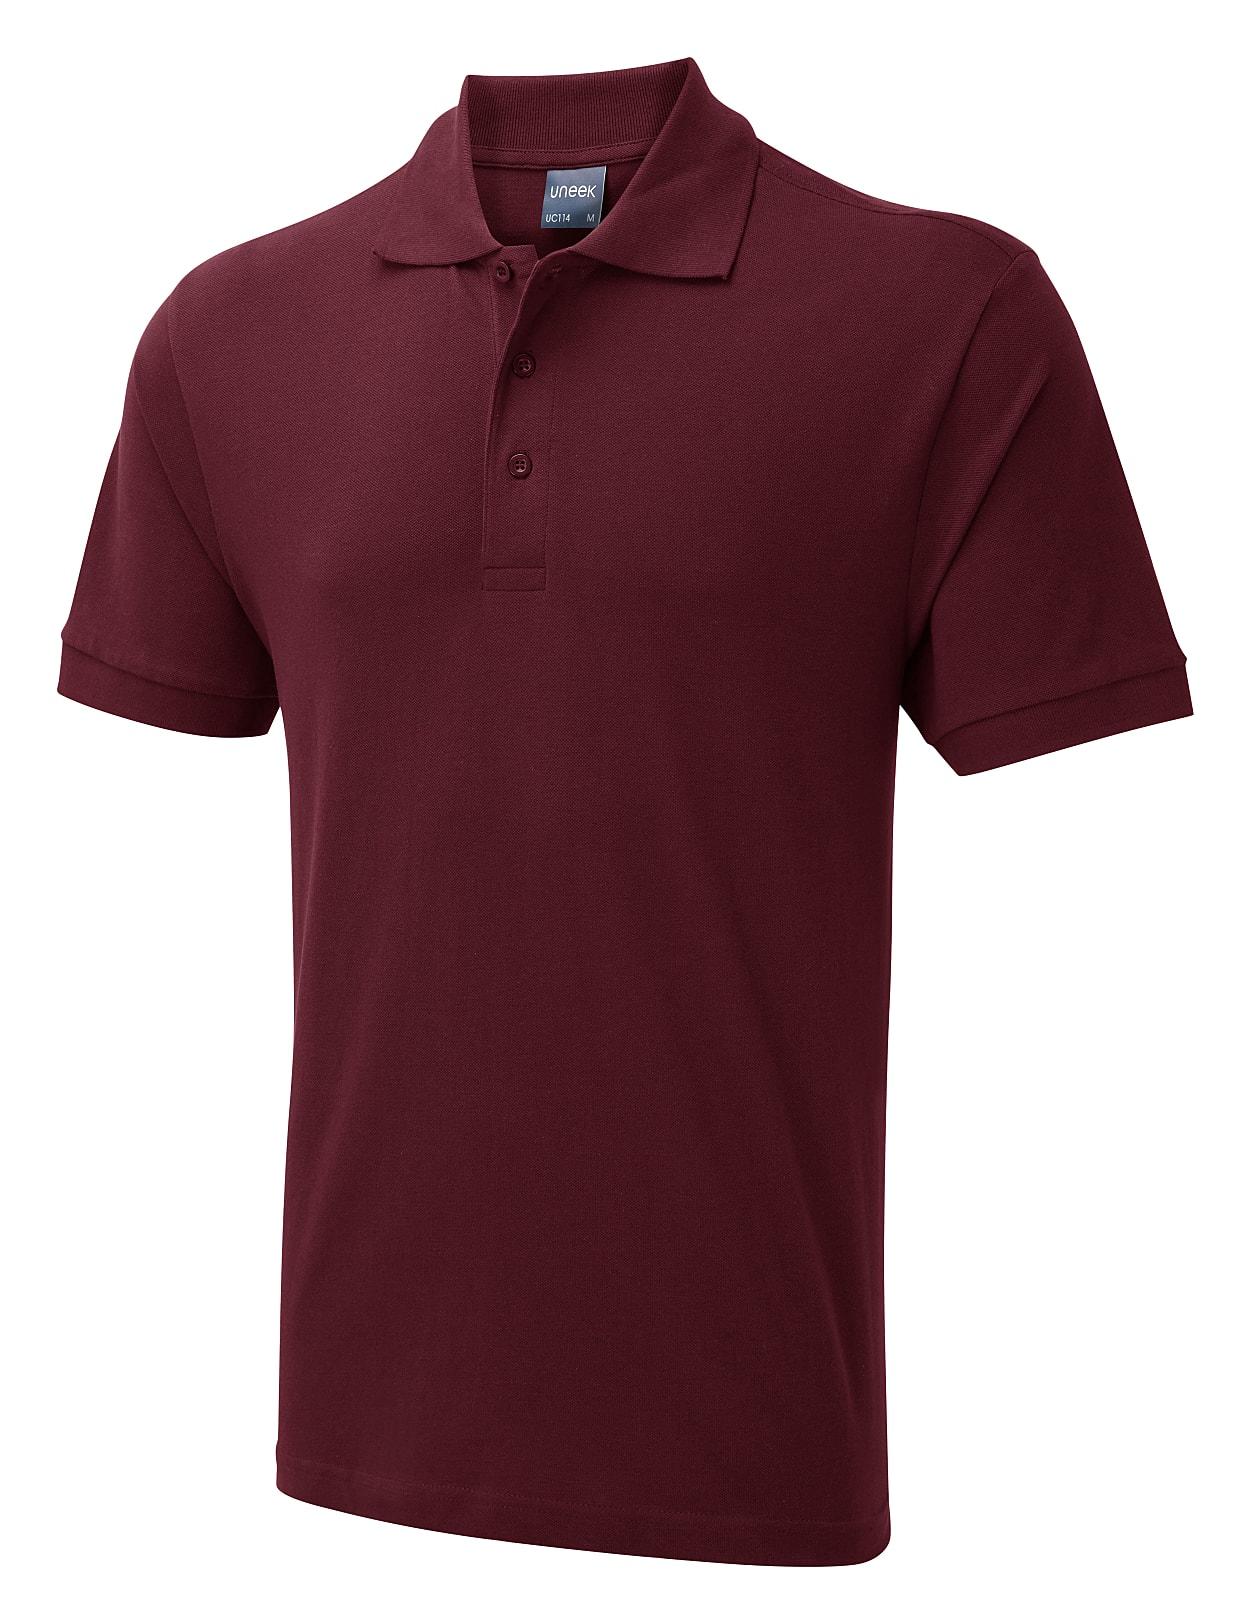 Uneek 180GSM Mens Polo Shirt in Maroon (Product Code: UC114)